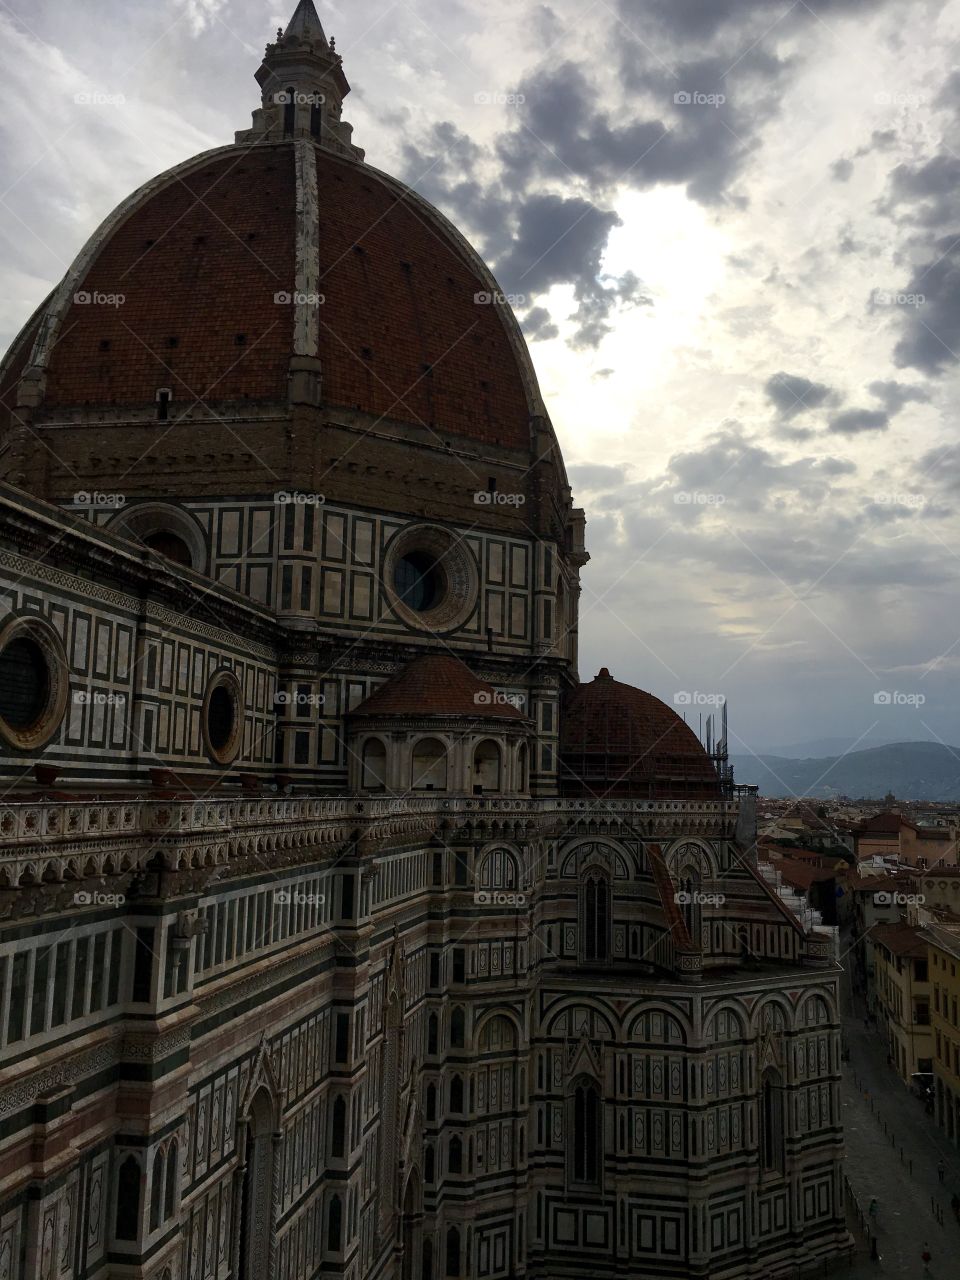 View of Santa Maria del Fiore, Firenze, from Giotto's bell tower